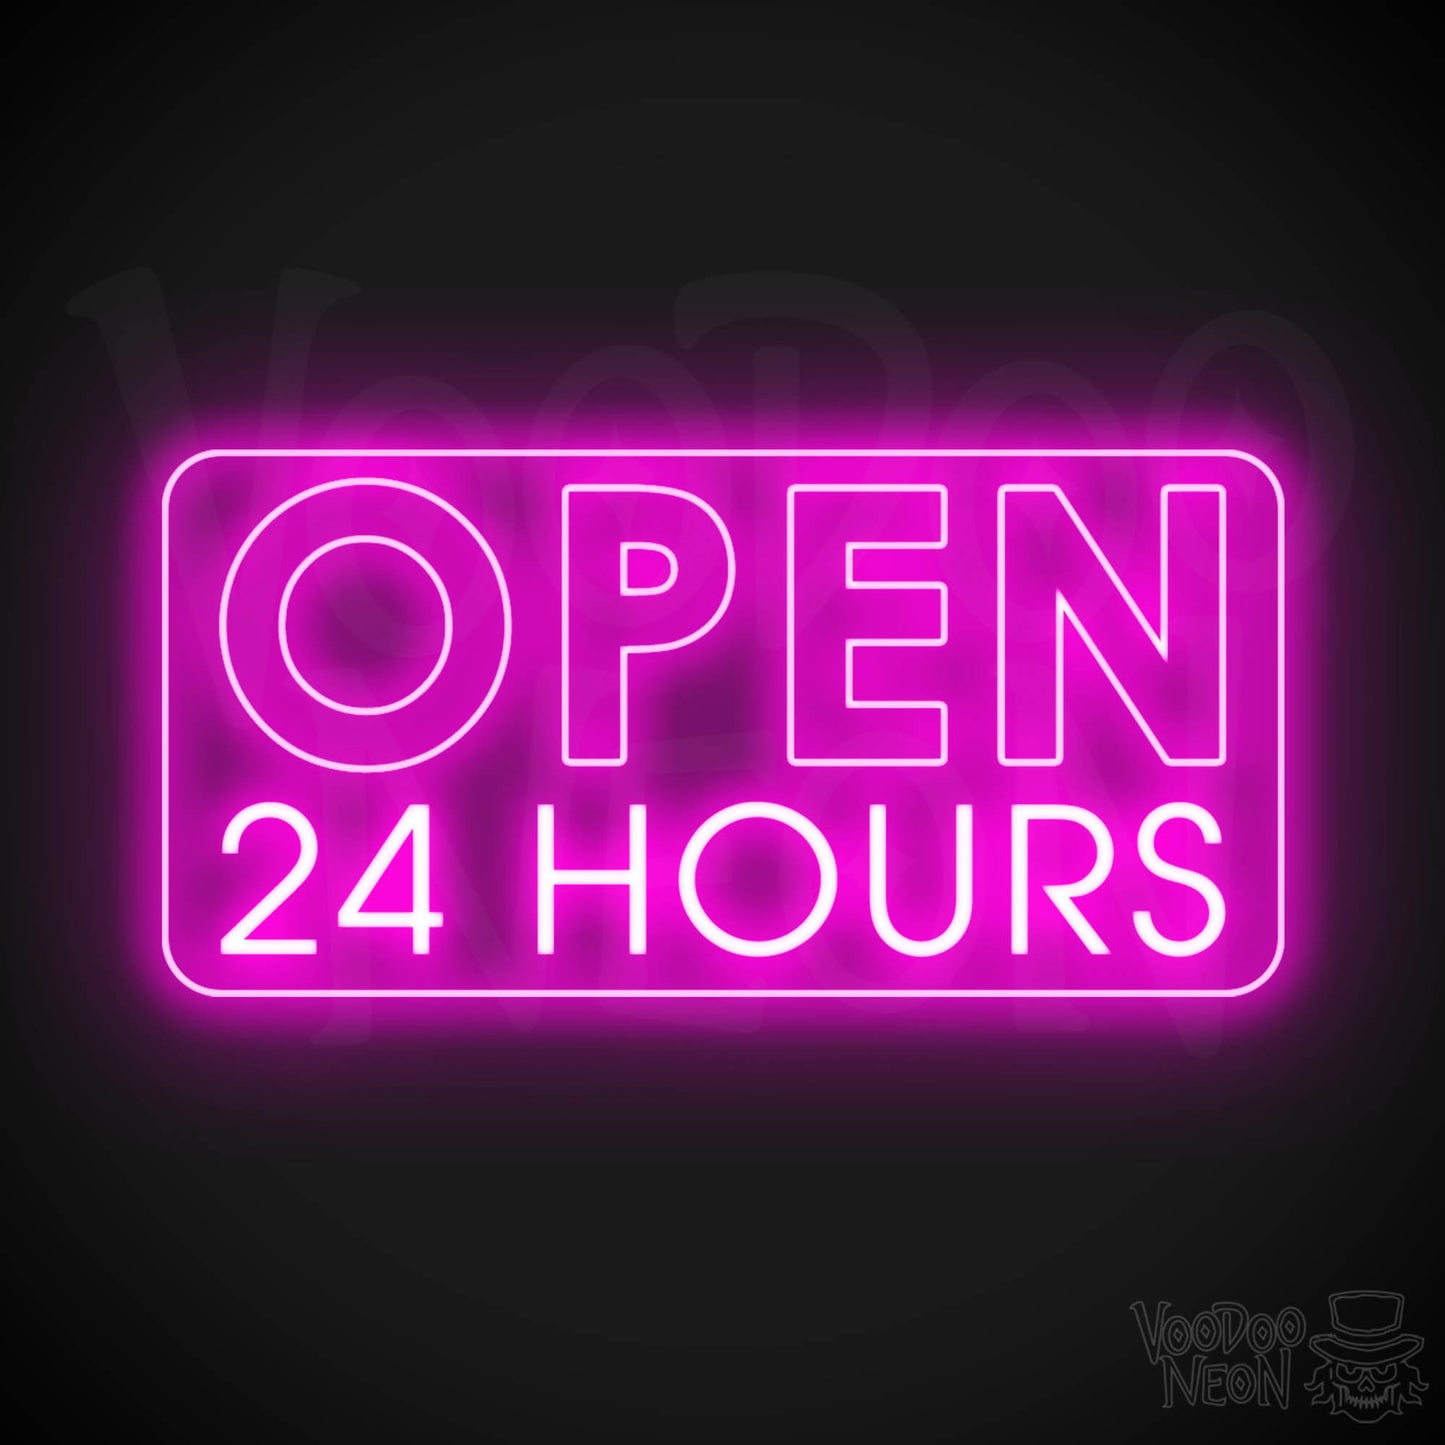 Open 24 Hours Neon Sign - Neon Open 24 Hours Sign - Shop Signs - Color Pink